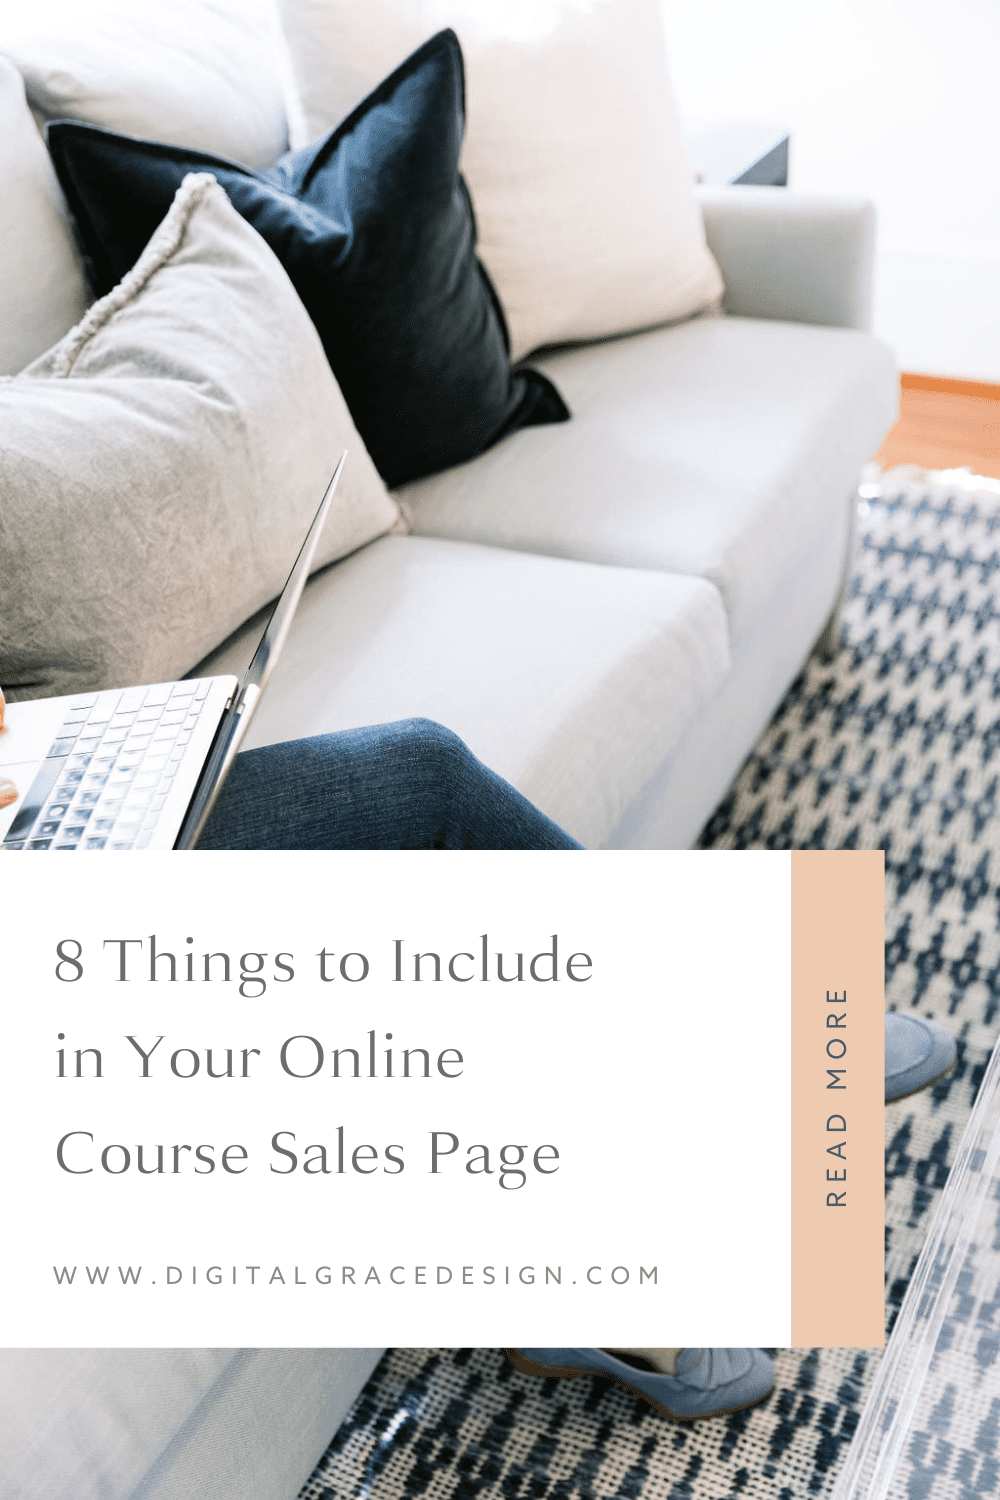 8 Things to Include in Your Online Course Sales Page